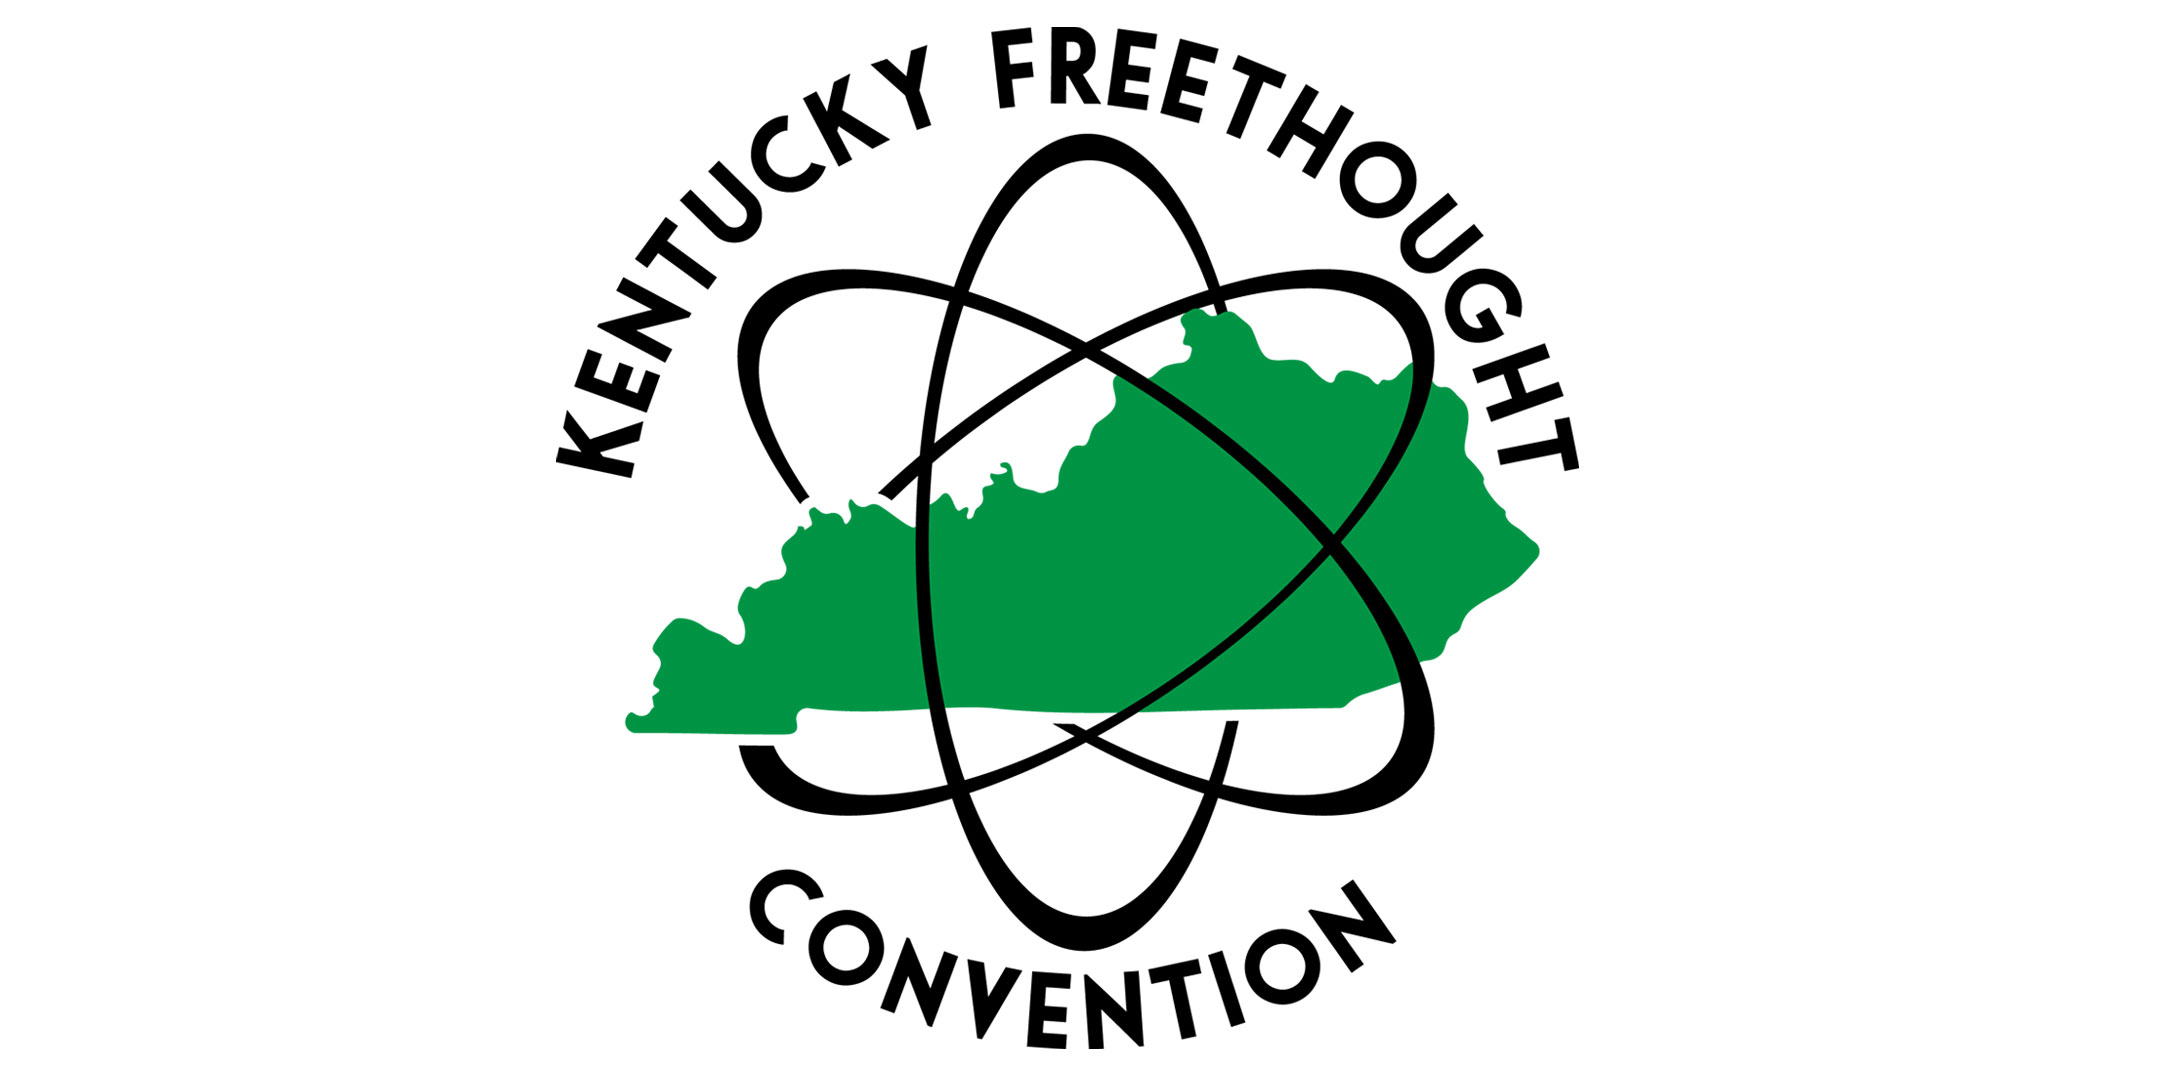 Kentucky Freethought Convention